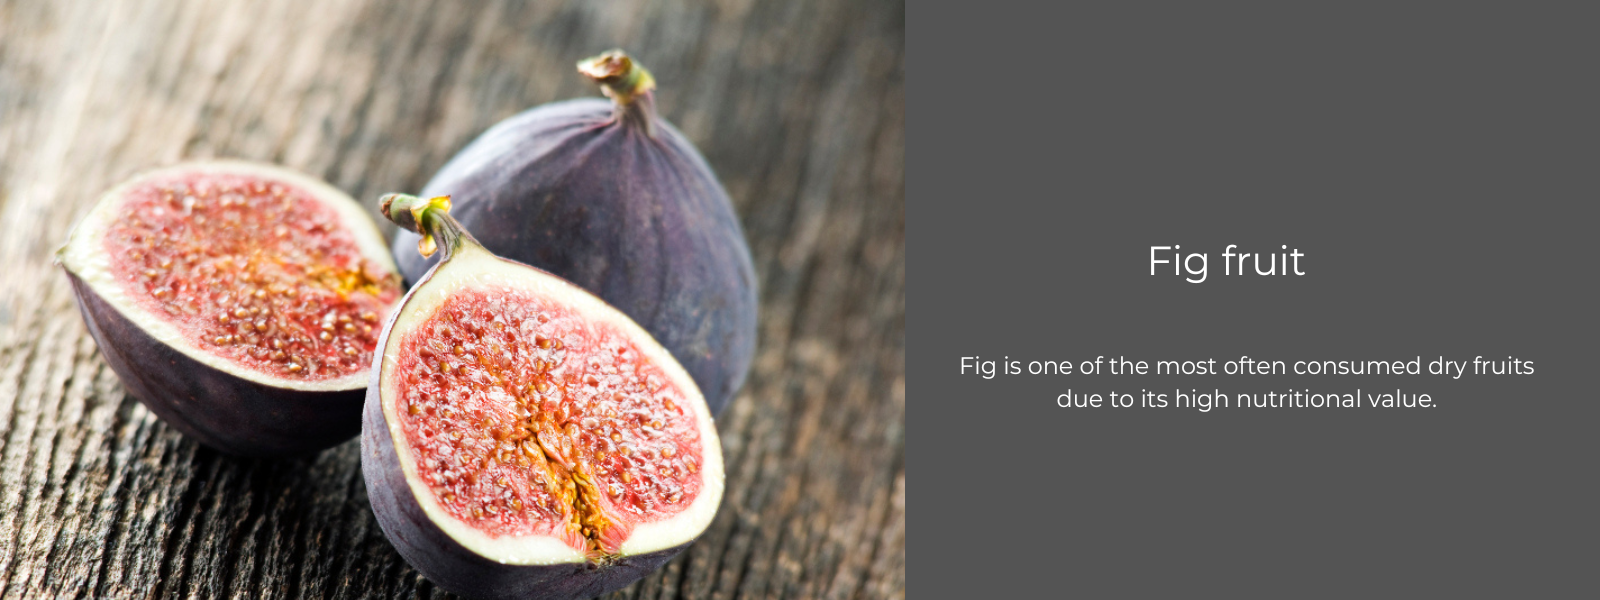 Fig fruit - Health Benefits, Uses and Important Facts